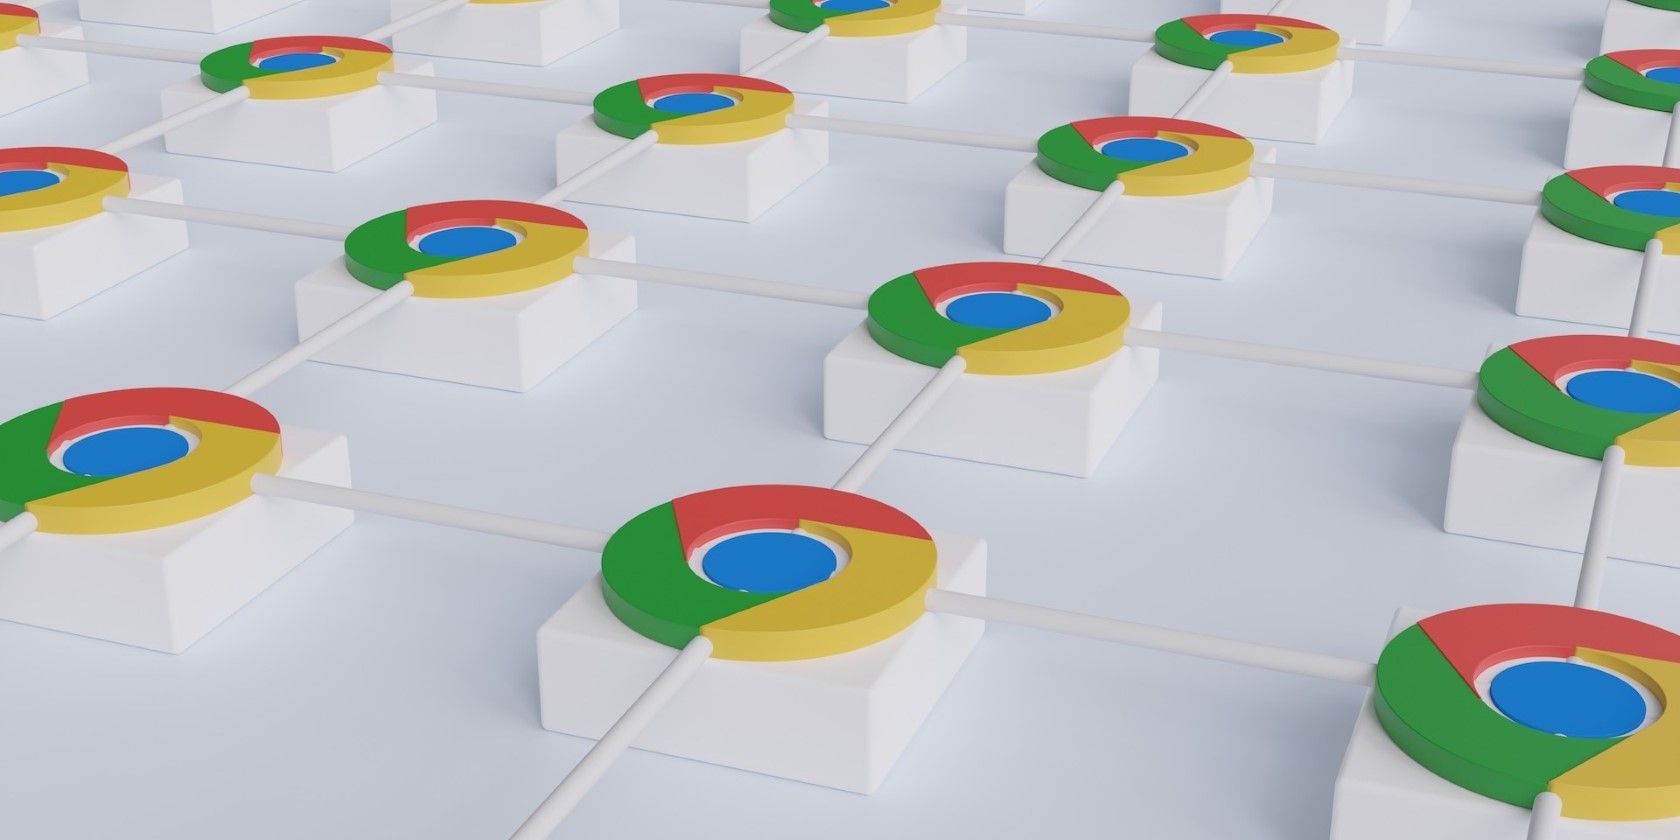 Google Chrome icons placed on a base right next to each other